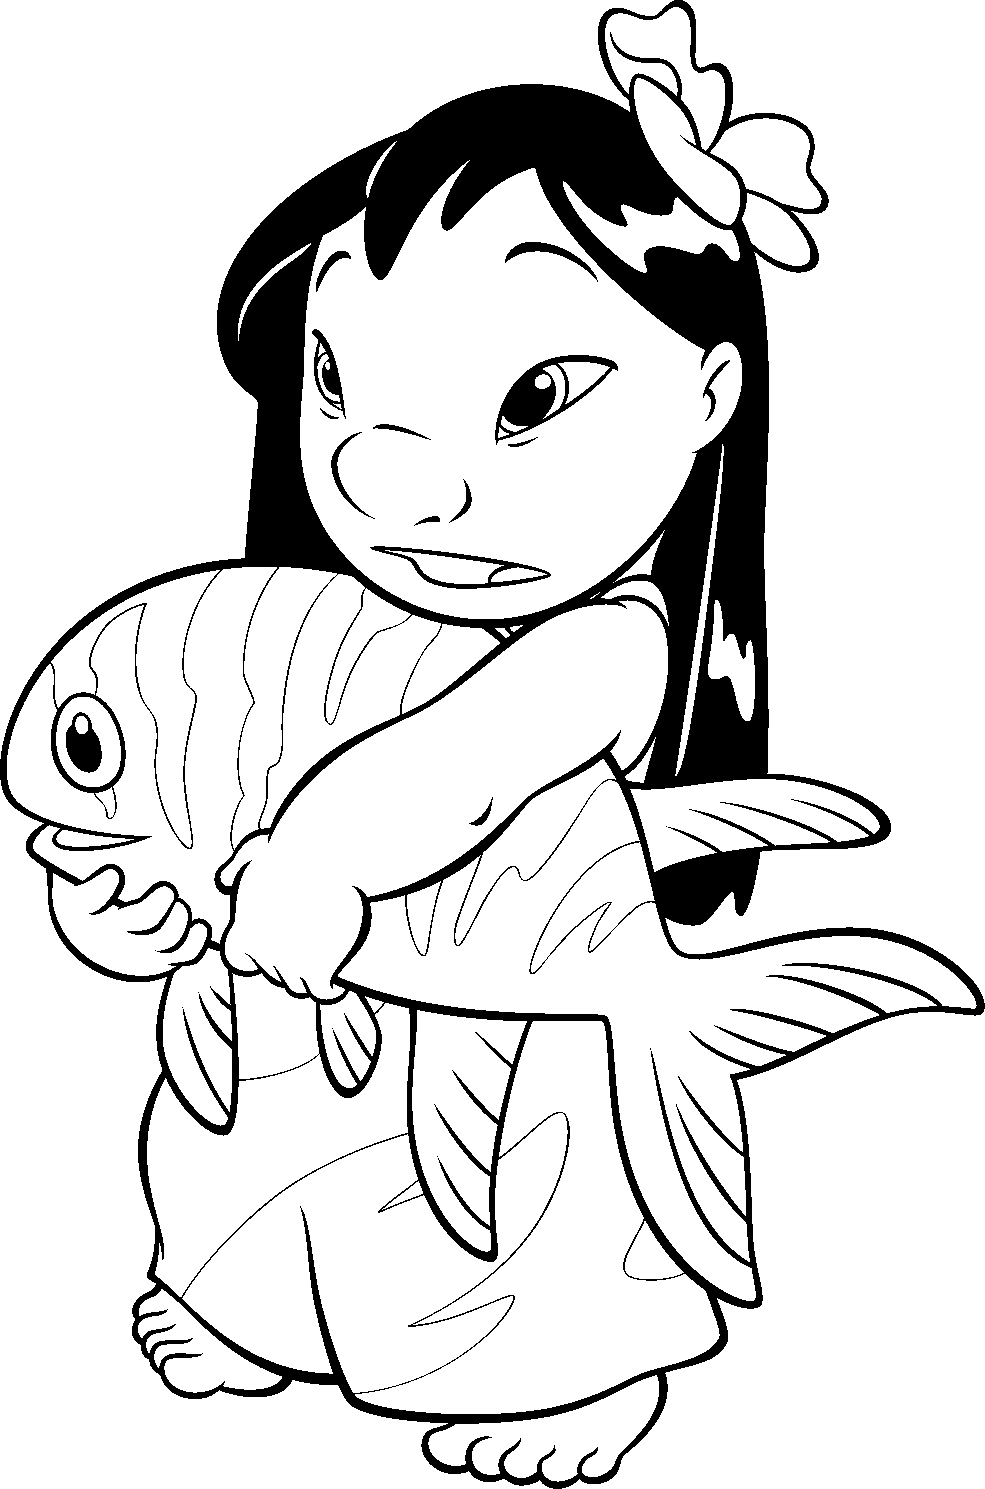 Lilo and stitch coloring pages to download and print for free